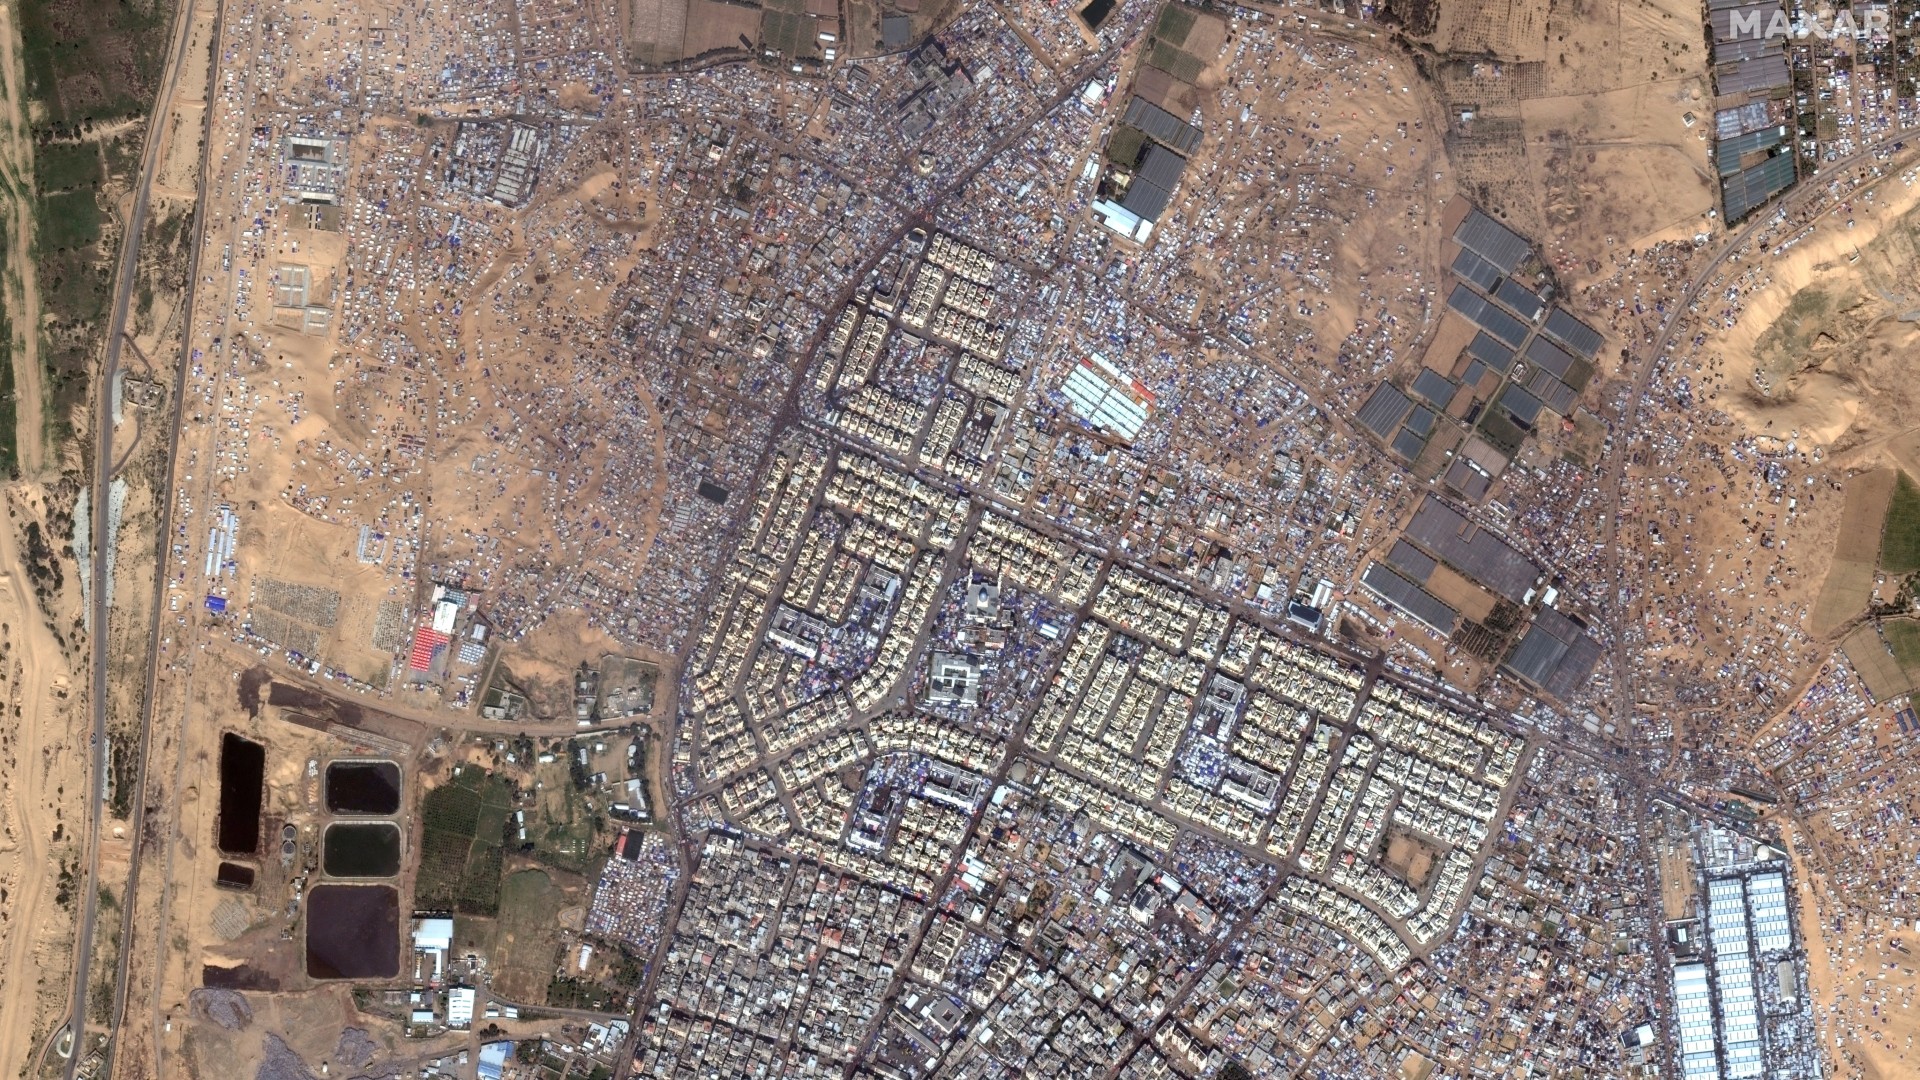 A satellite image shows tent shelters for displaced people in Rafah, Gaza, 7 February (Maxar Technologies/Reuters)